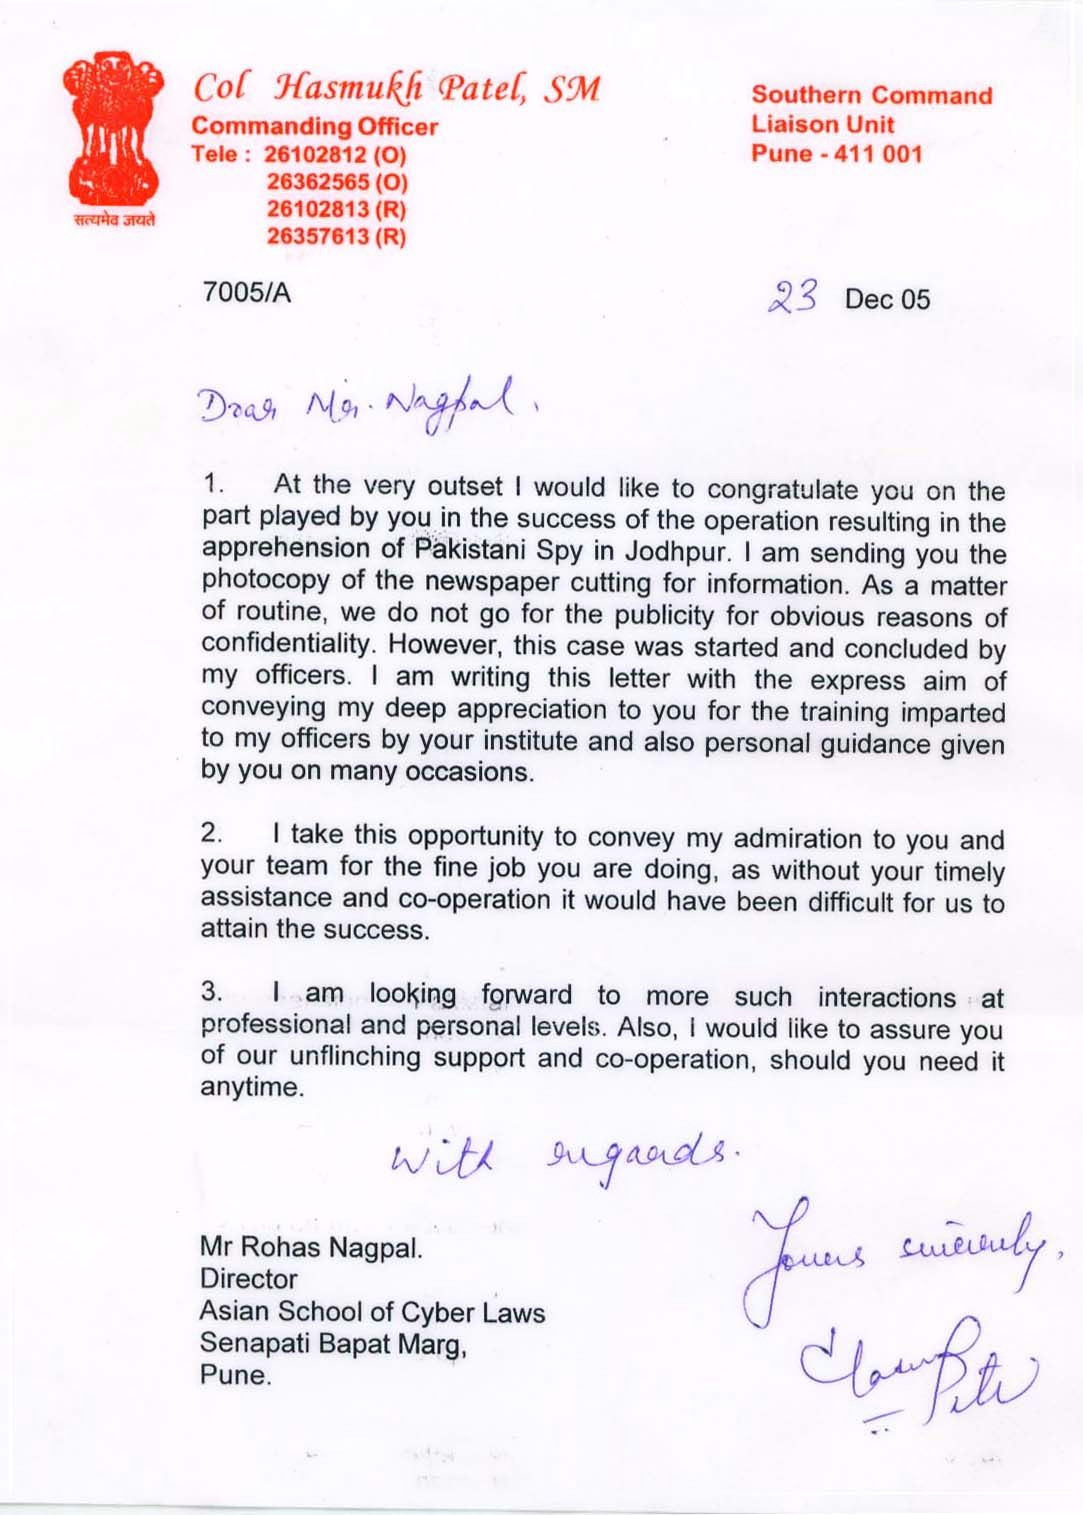 Indian Army Drawing Easy Letter Of Appreciation From the Indian Army for Help with